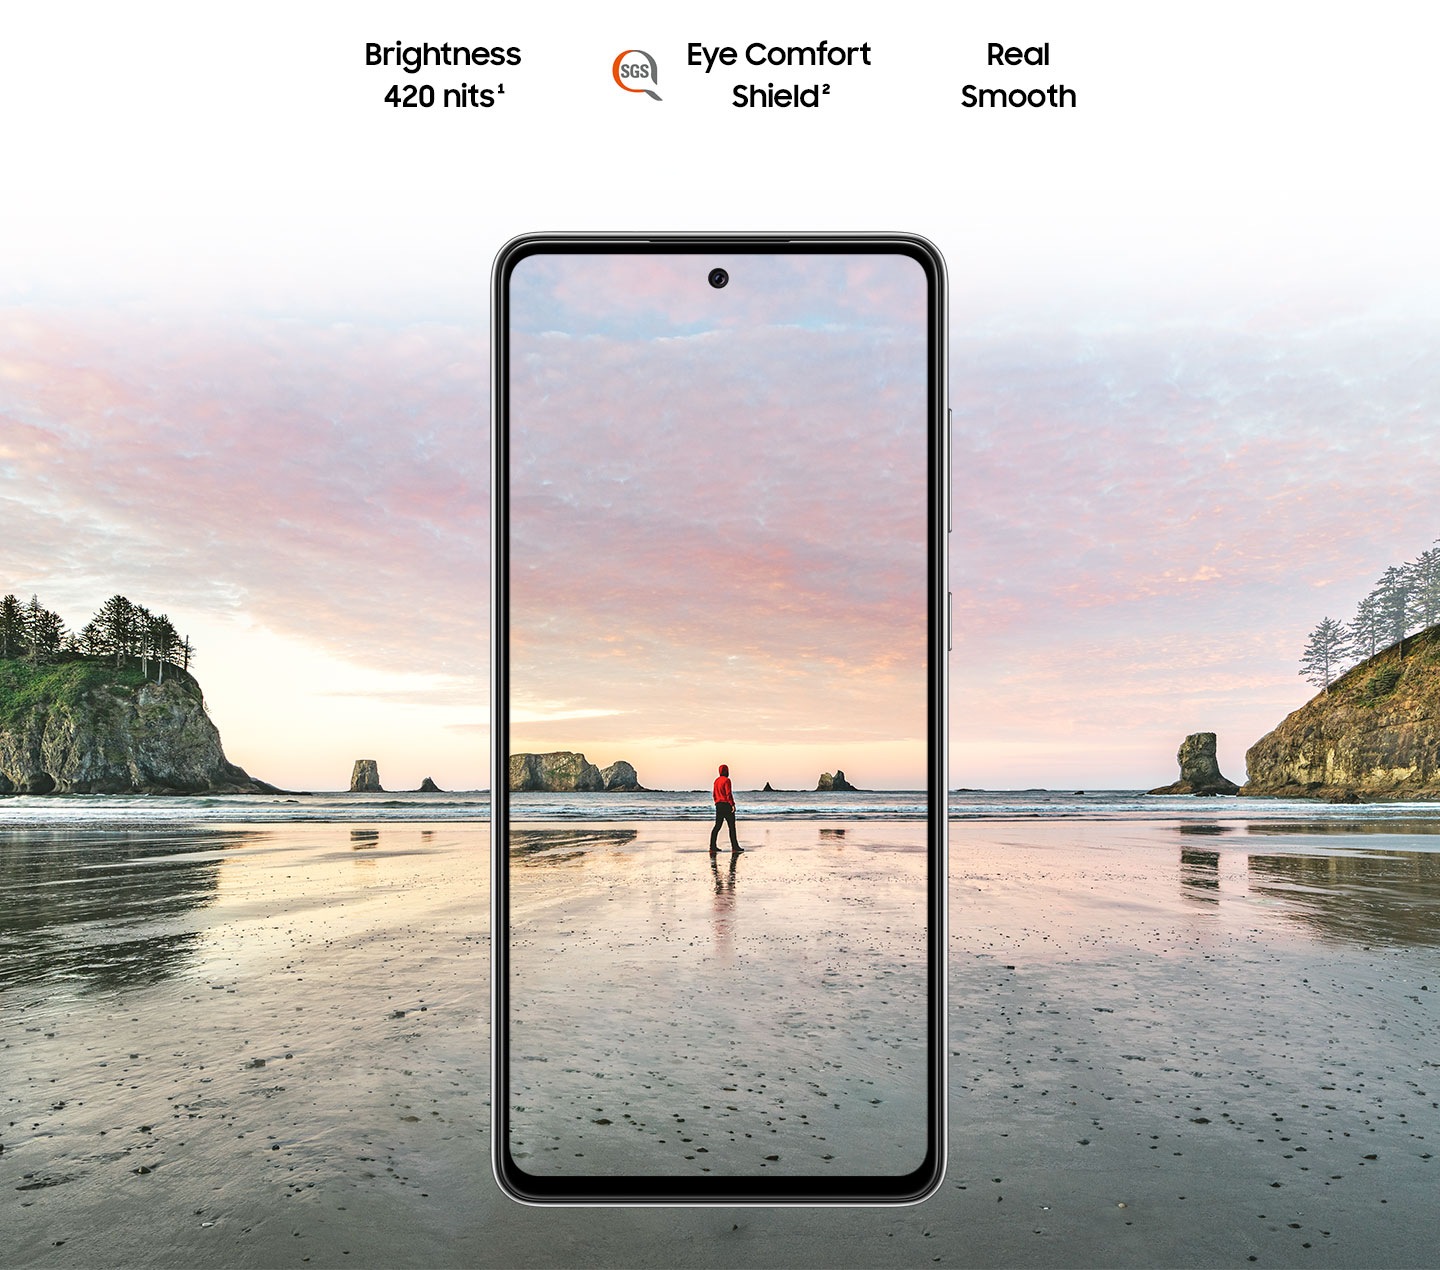 Galaxy A72 seen from the front. A scene of a man standing on a beach at sunset. Brightness 420 nits, Eye Comfort Shield with the SGS logo and Real Smooth.